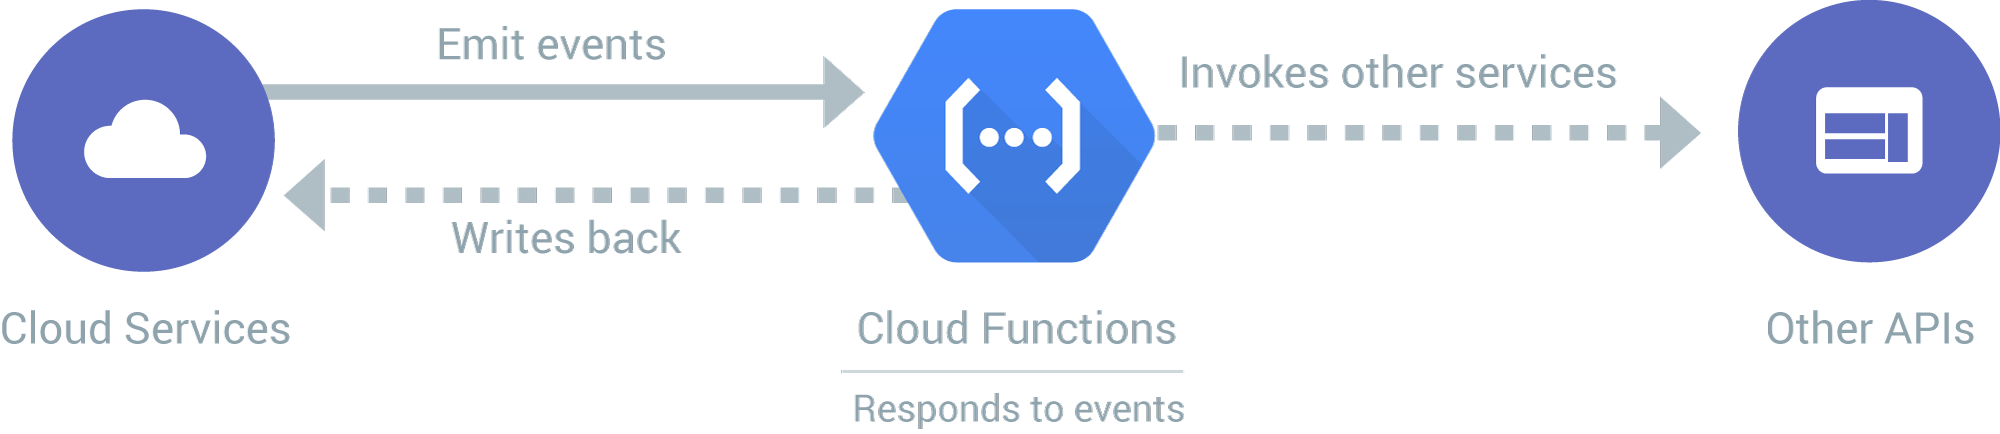 Reference: https://cloud.google.com/images/products/functions/how-it-works.svg